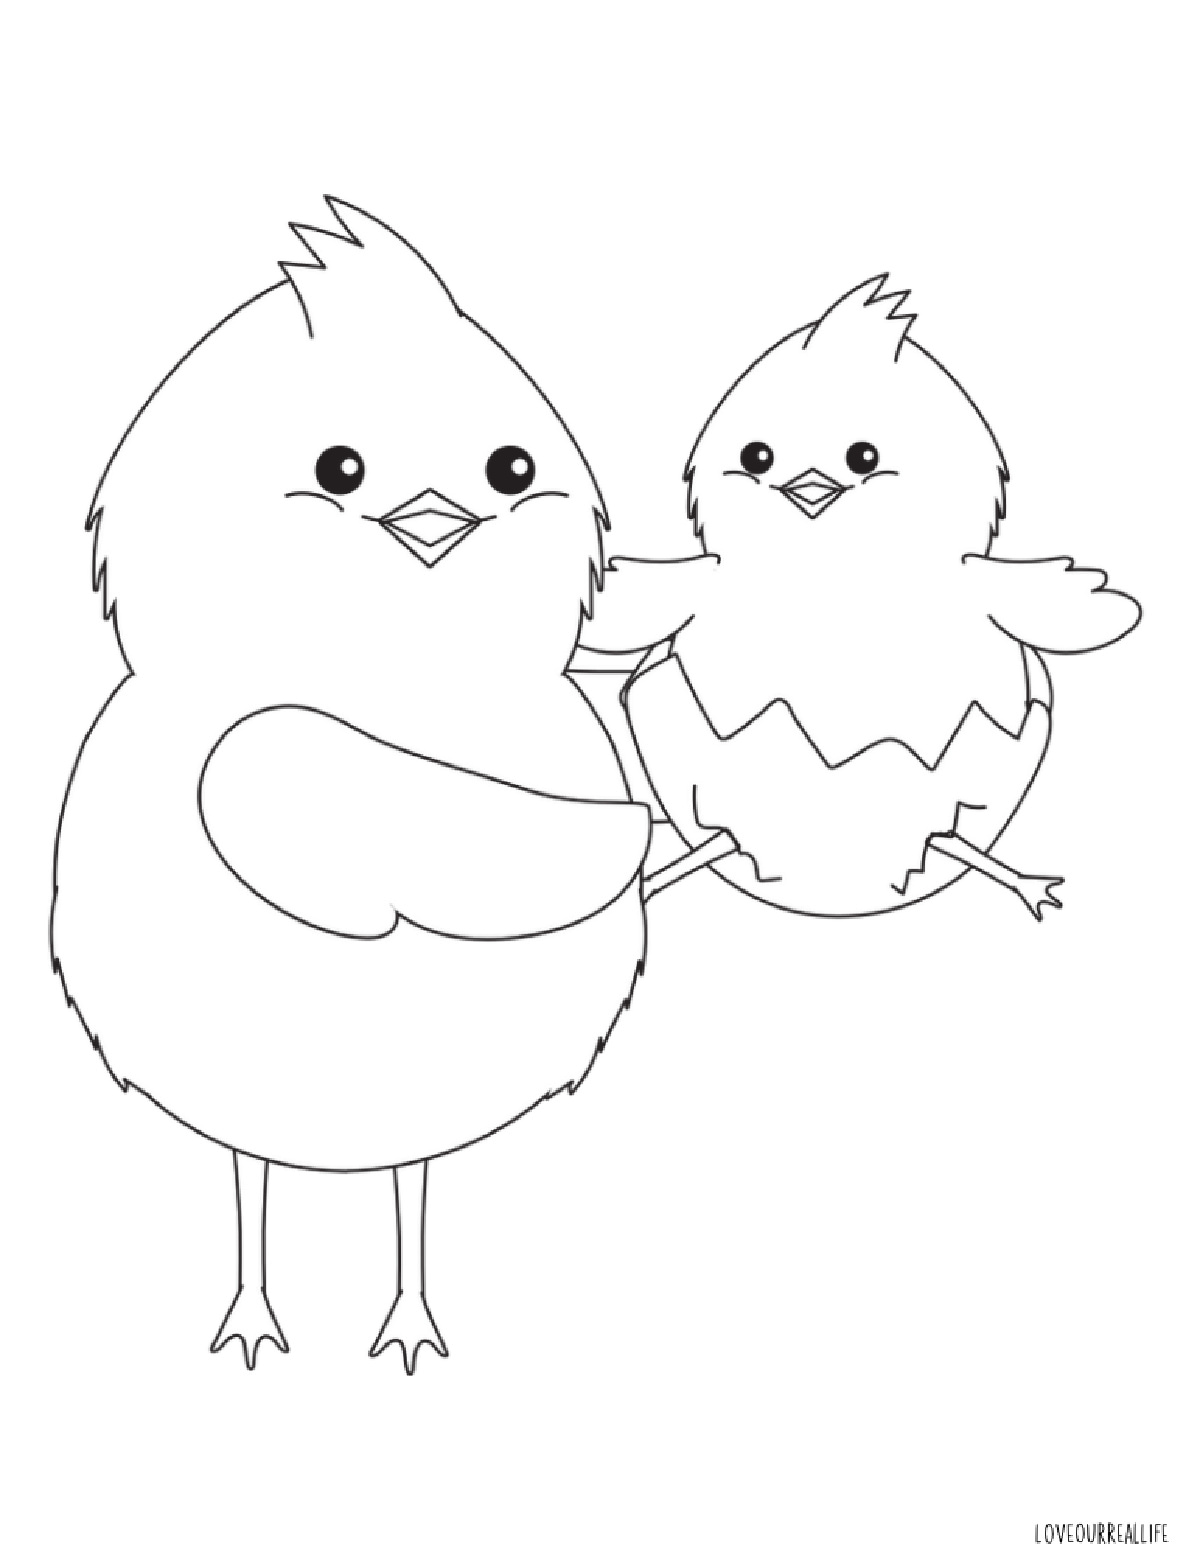 Chick Coloring Pages: Free Printable for Kids ⋆ Love Our Real Life